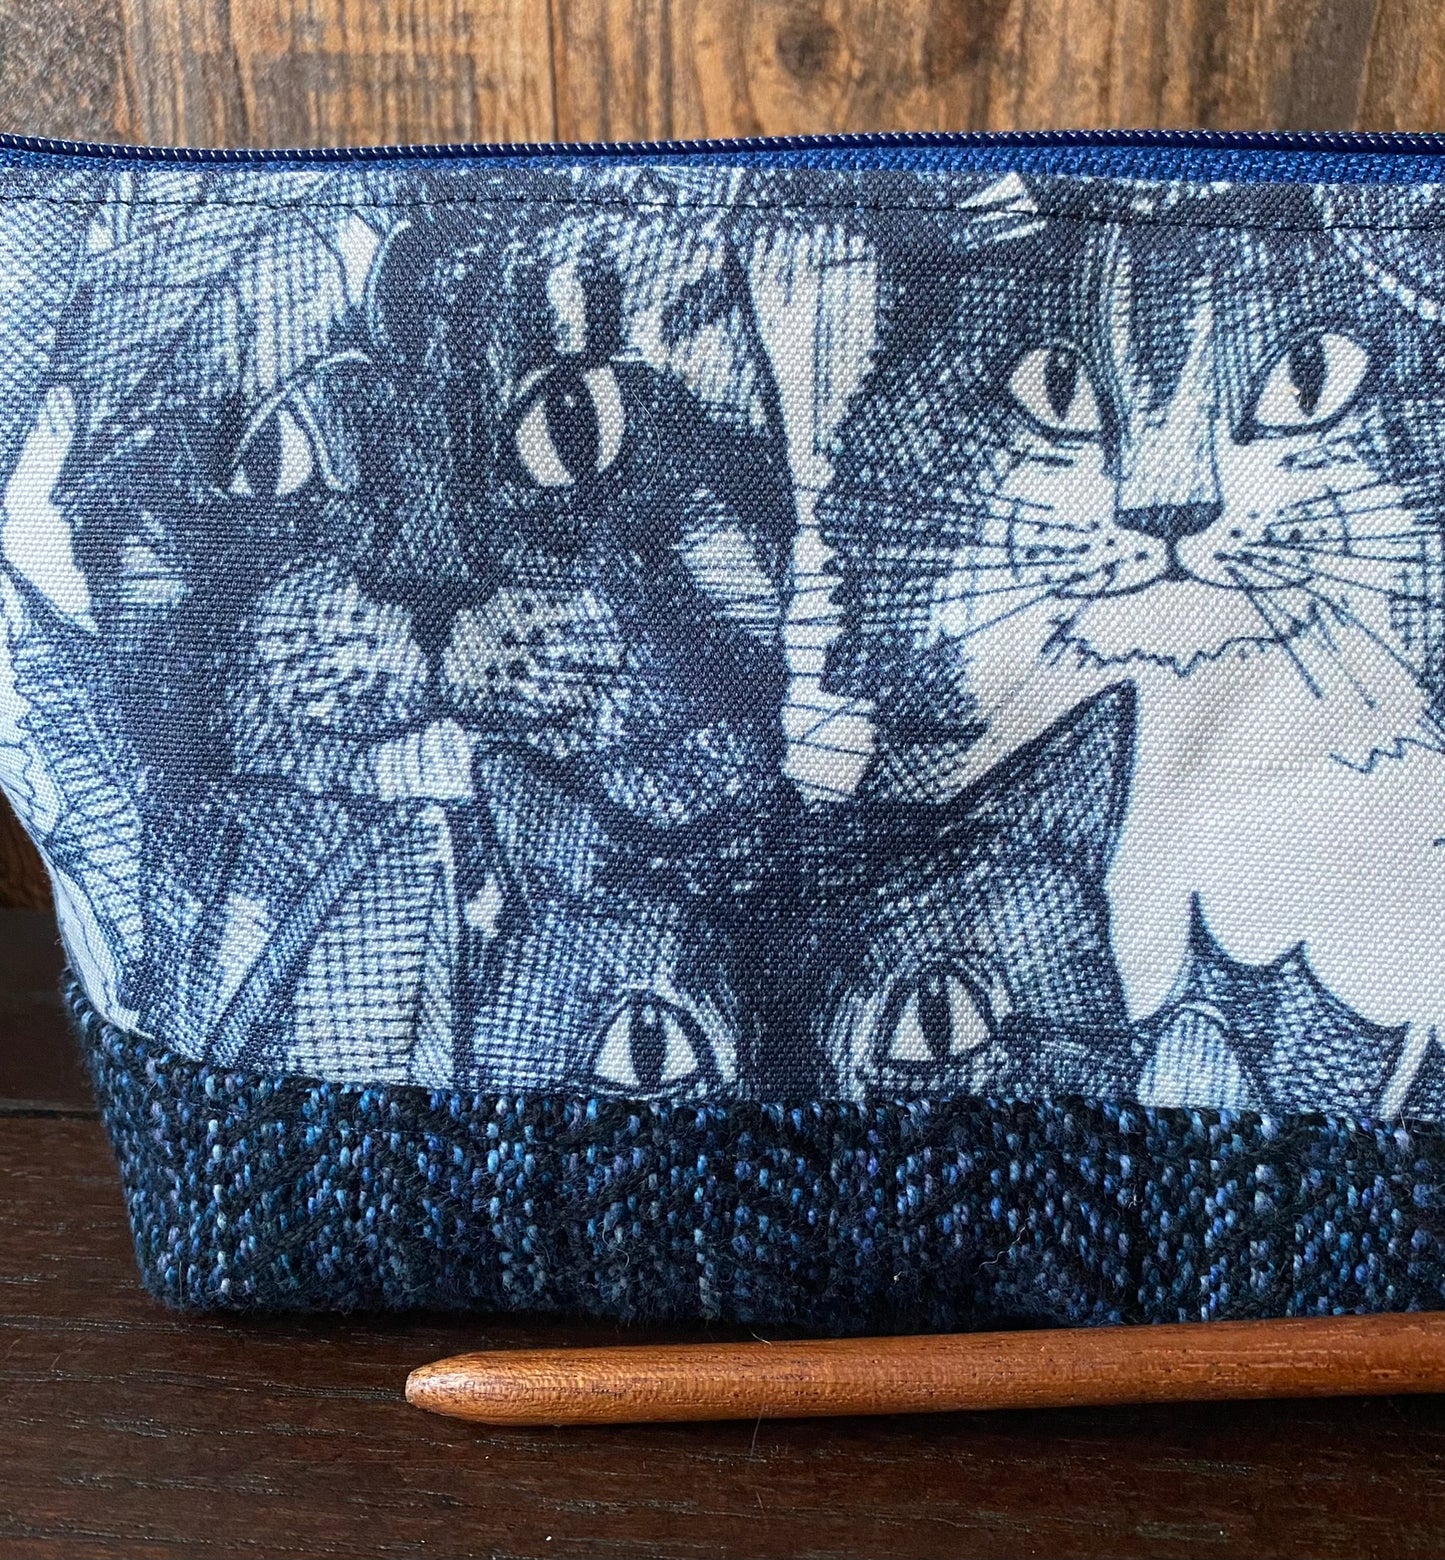 Indigo Cats Open Wide Spindle Bags